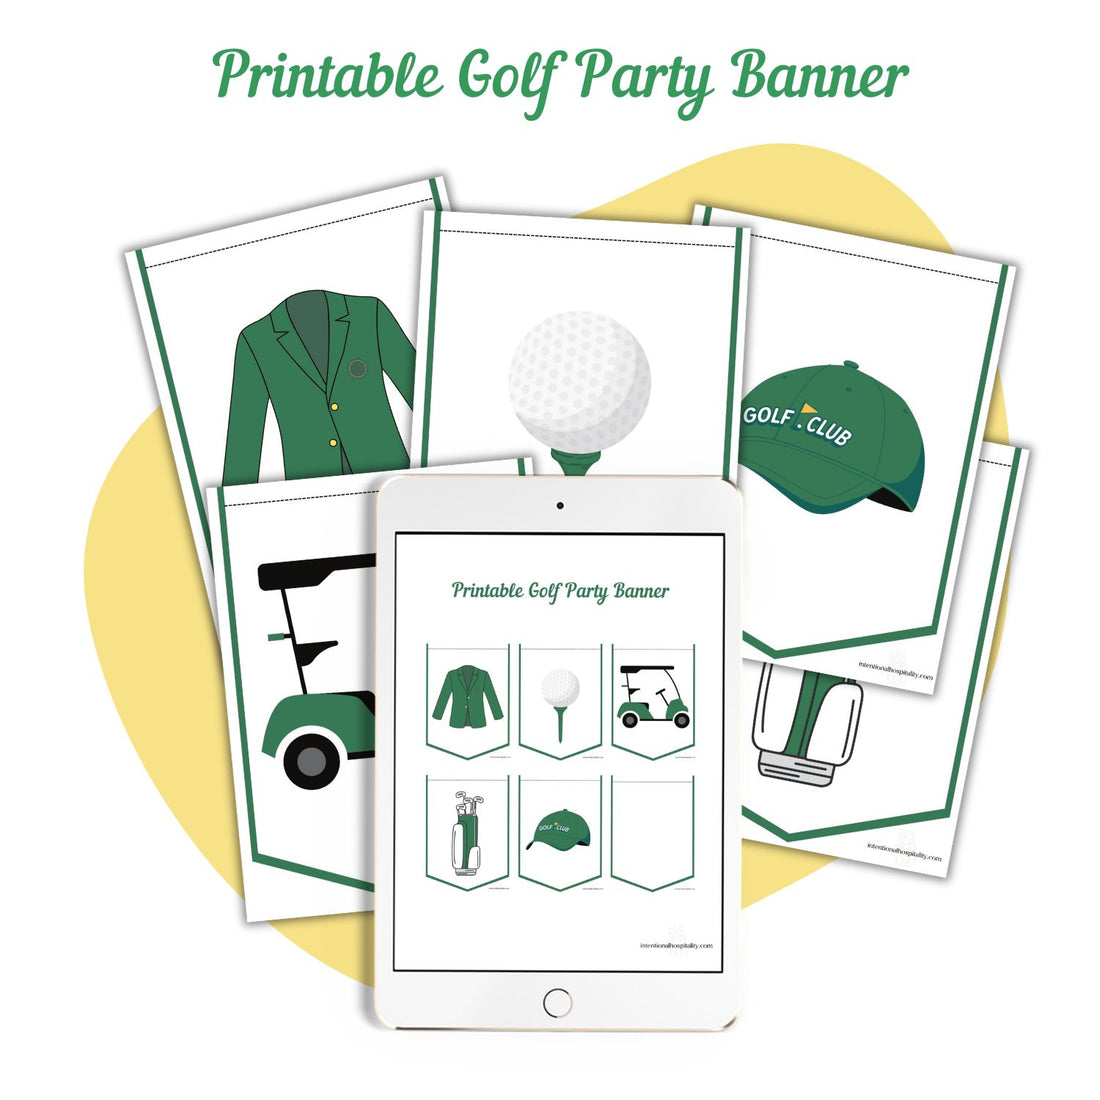 Printable Golf Party Banner